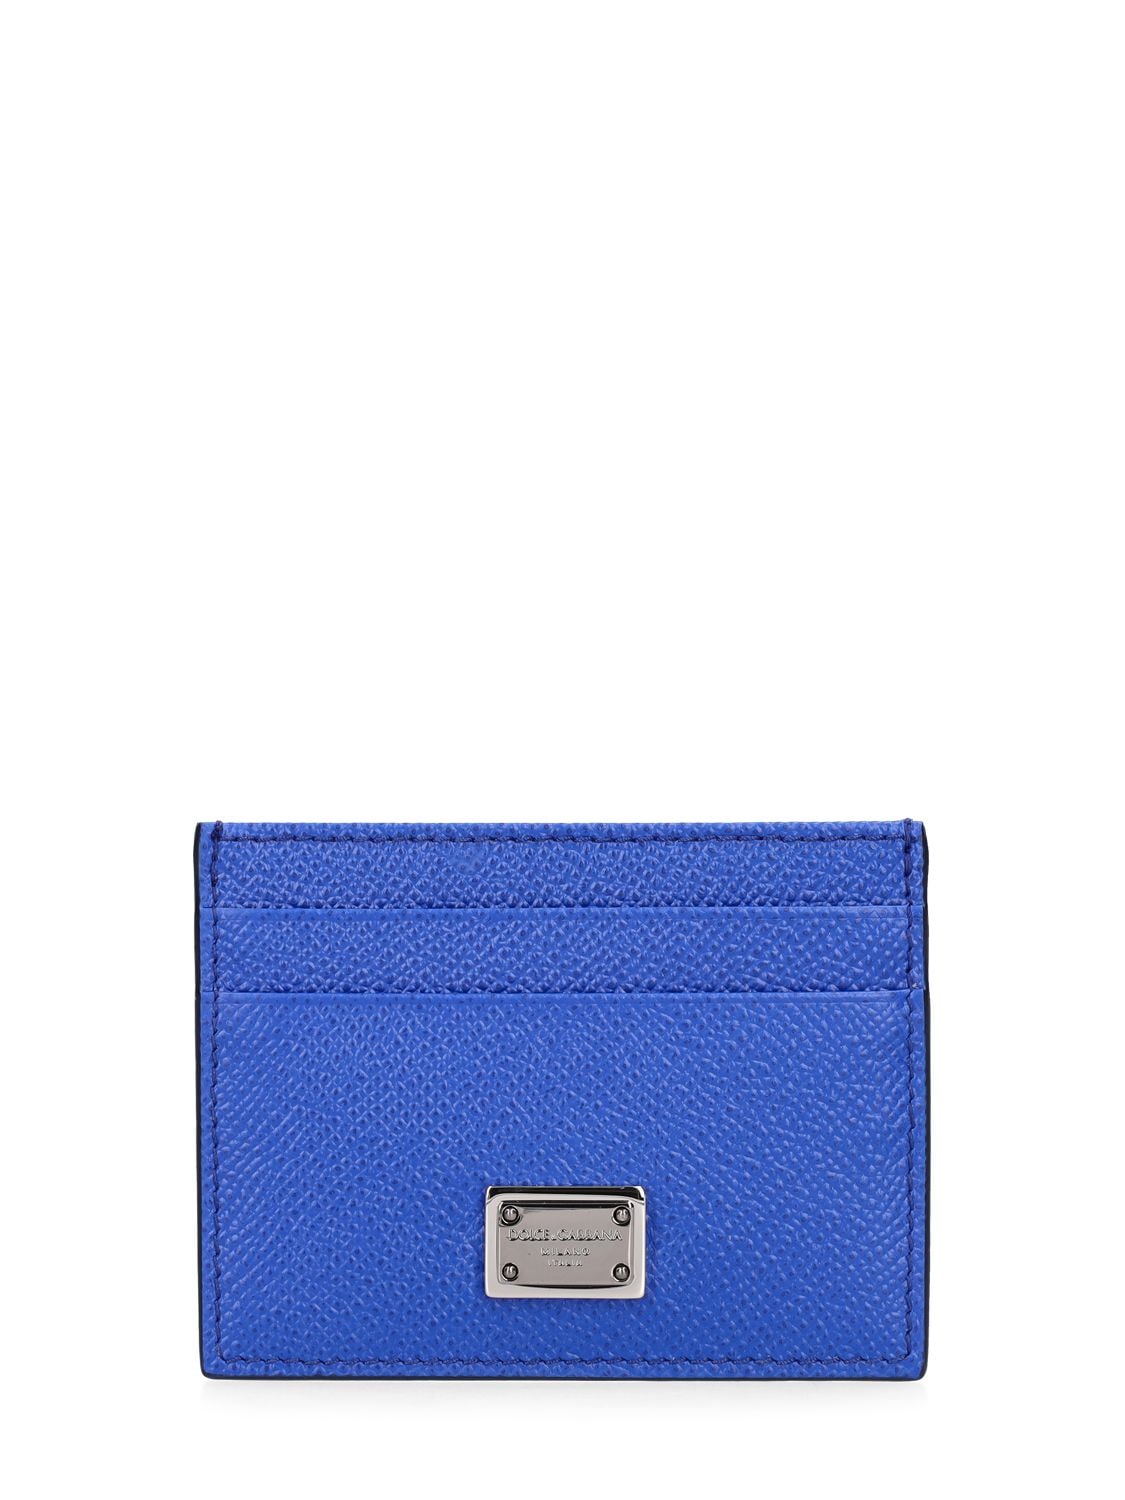 Dolce & Gabbana Logo Plaque Leather Card Holder In Bright Blue